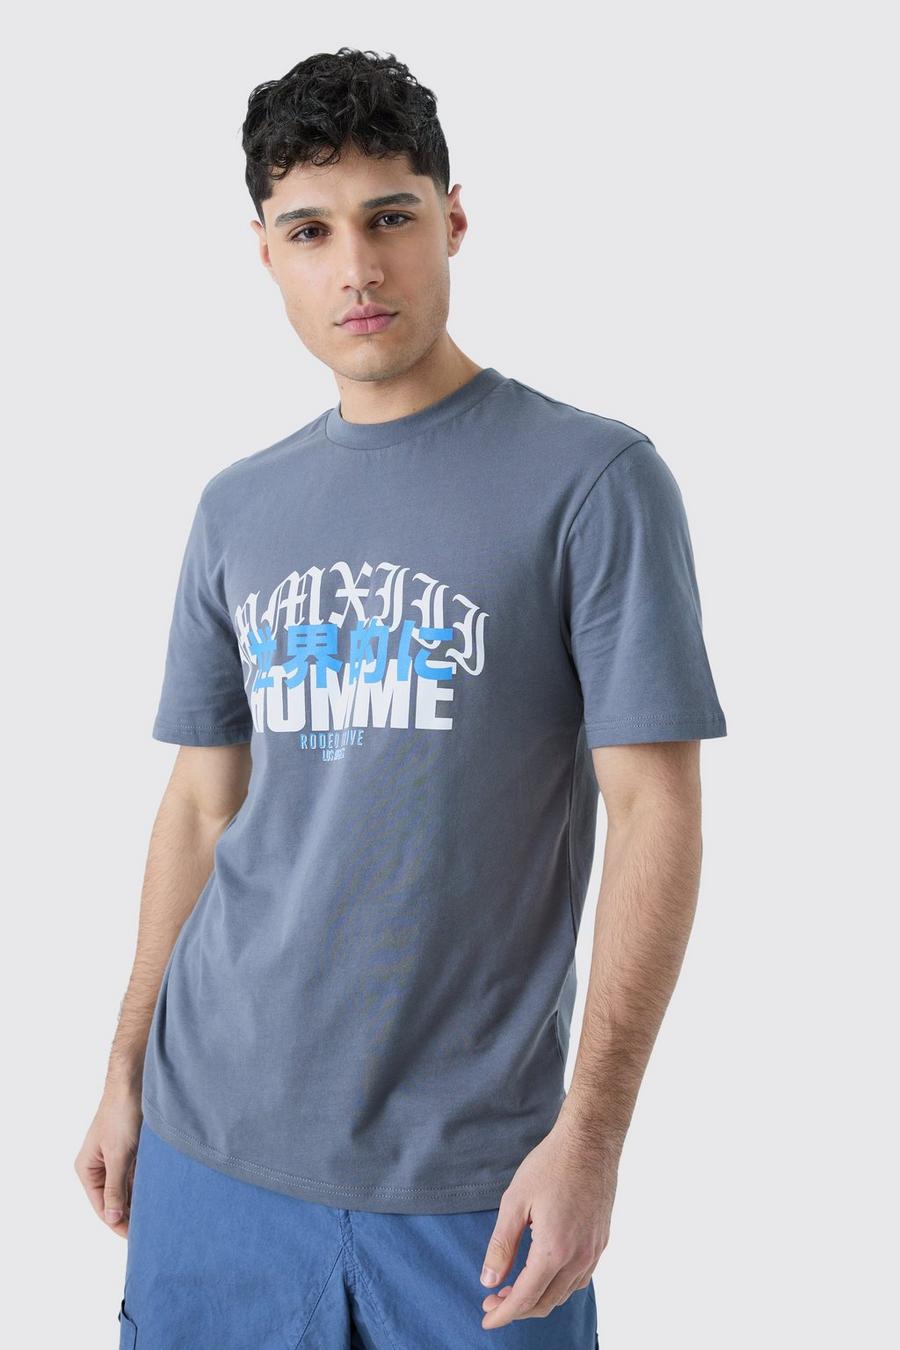 Charcoal Homme Rodeo Drive T-shirt